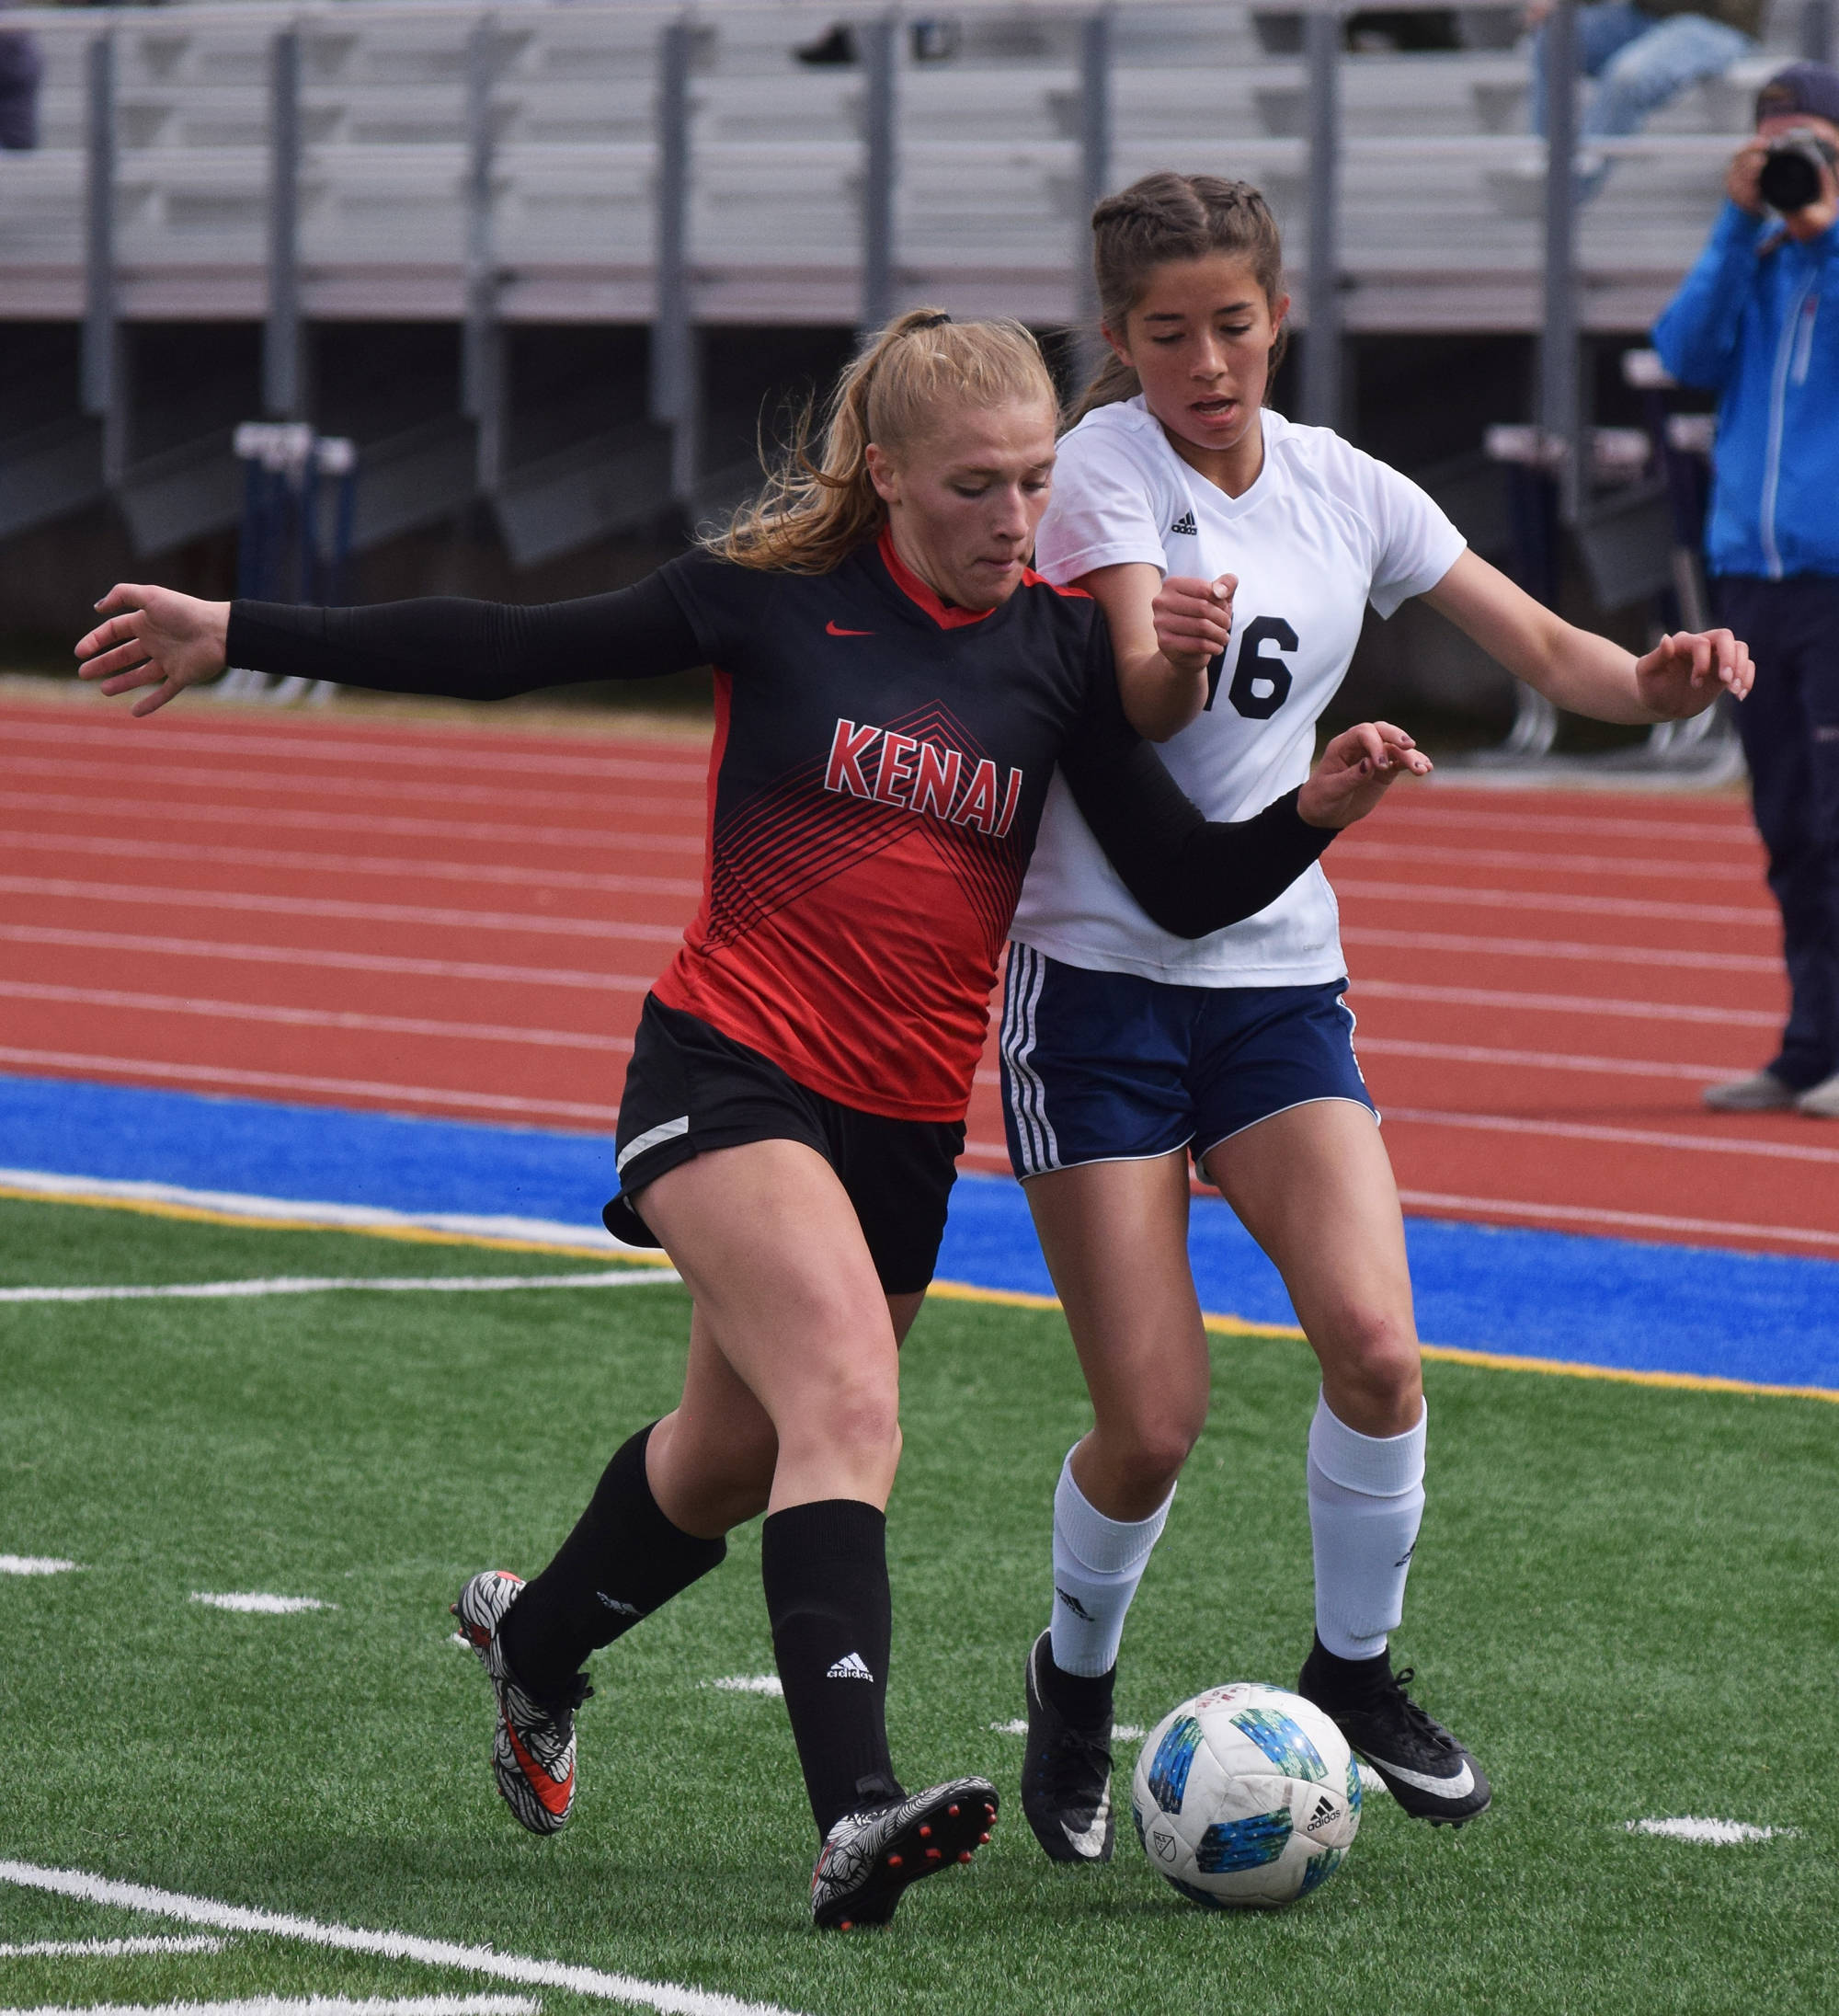 Kenai Central’s Damaris Severson (left) battles for the ball with Soldotna’s Sierra Kuntz Saturday in the Peninsula Conference girls soccer championship at Soldotna High School. (Photo by Joey Klecka/Peninsula Clarion)